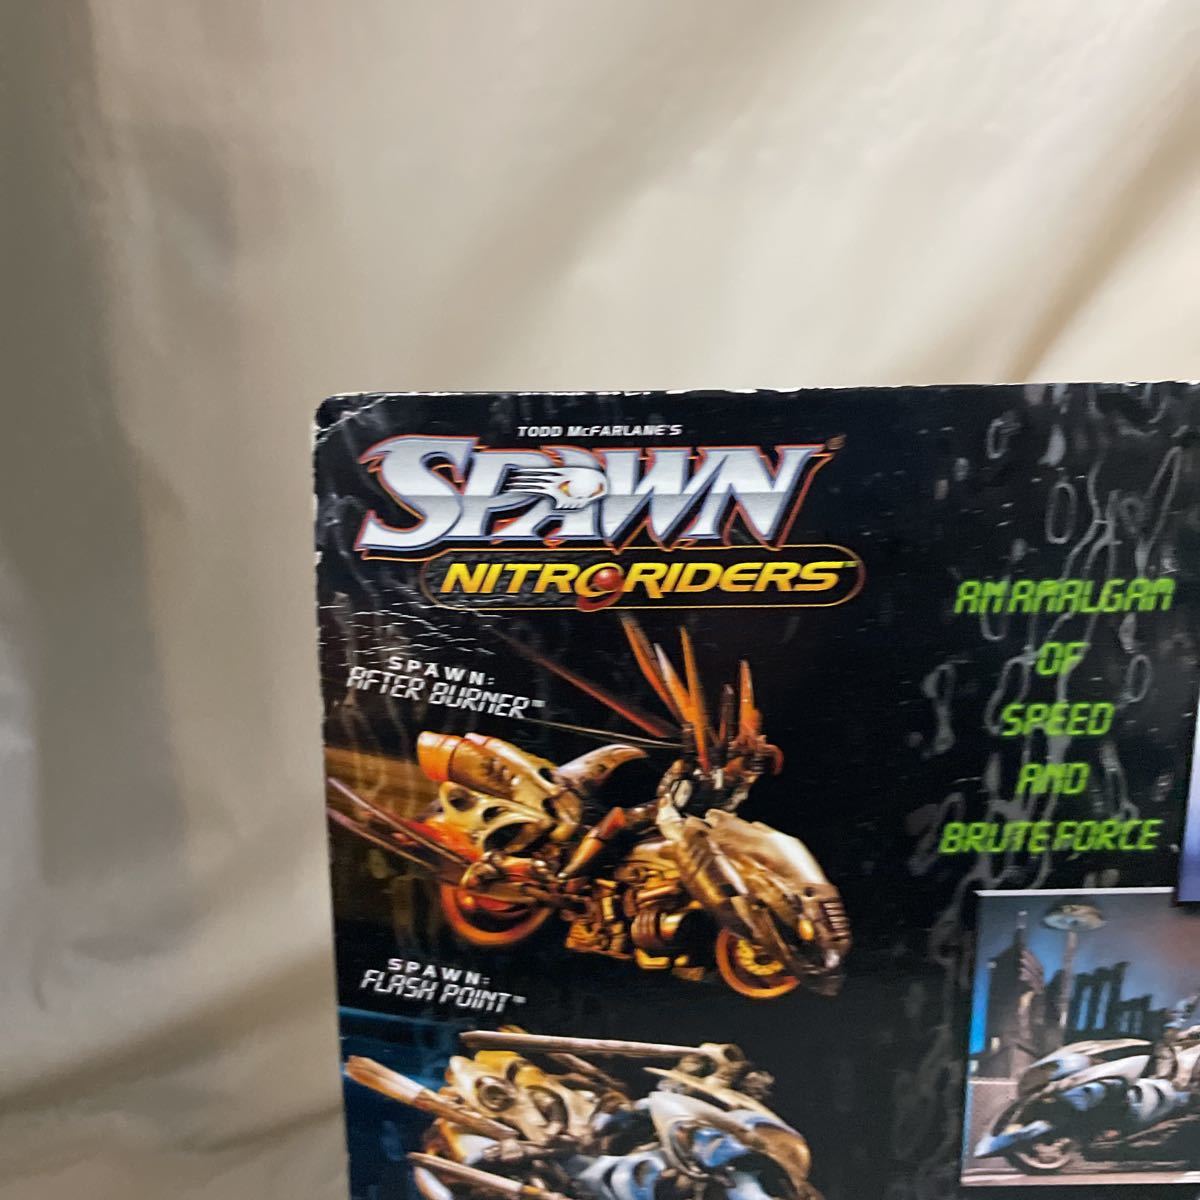 SPAWN NITRO RIDERS LIMITED EDITION スポーン ニトロライダーズ 限定版 エクリプス5000 McFarlane  Toys eclipse5000